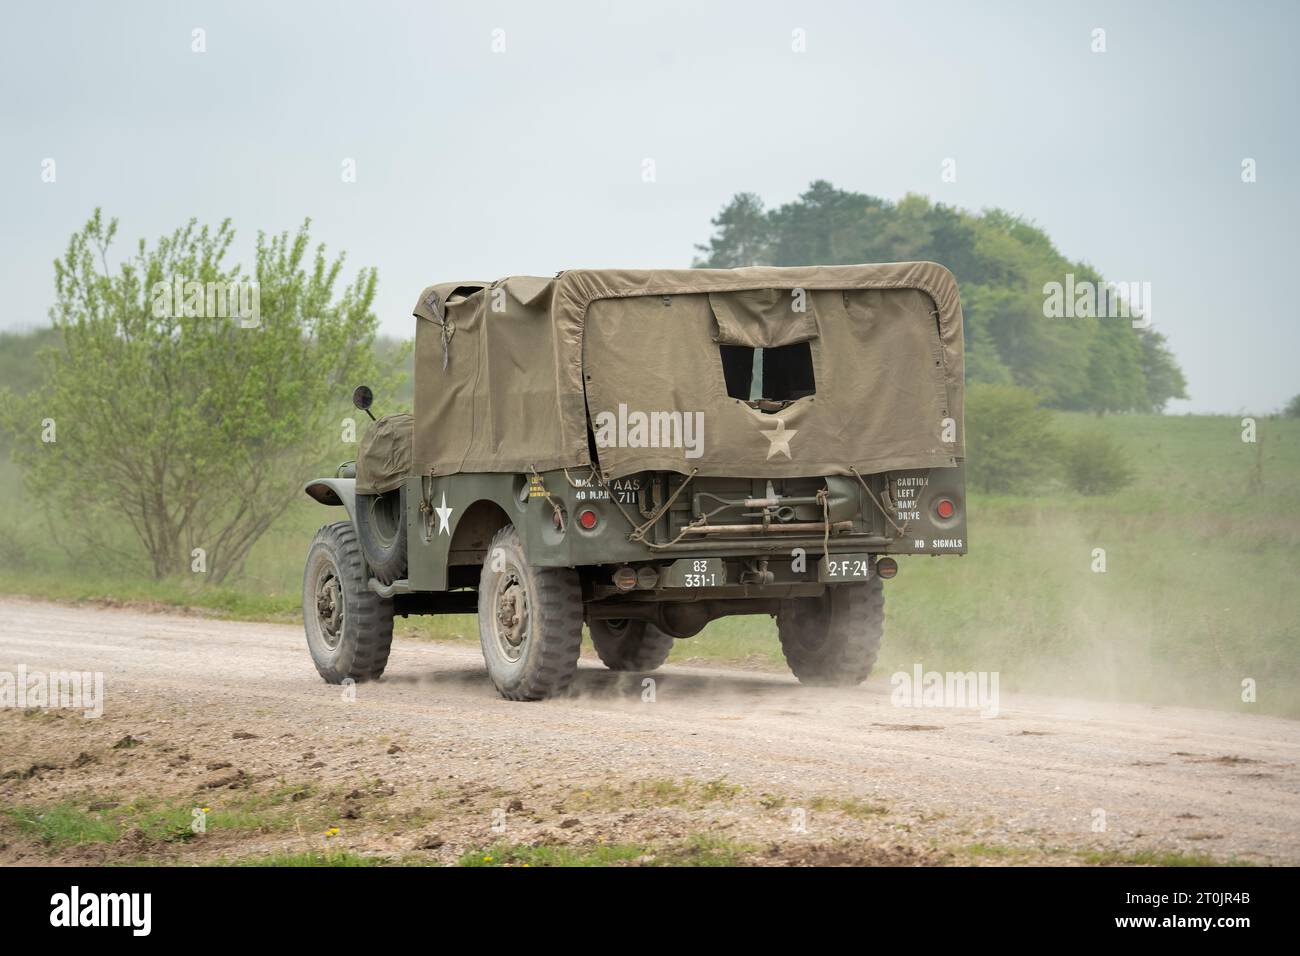 an old military USA Jeep transport with canvass back cover, driving along a dirt track Stock Photo